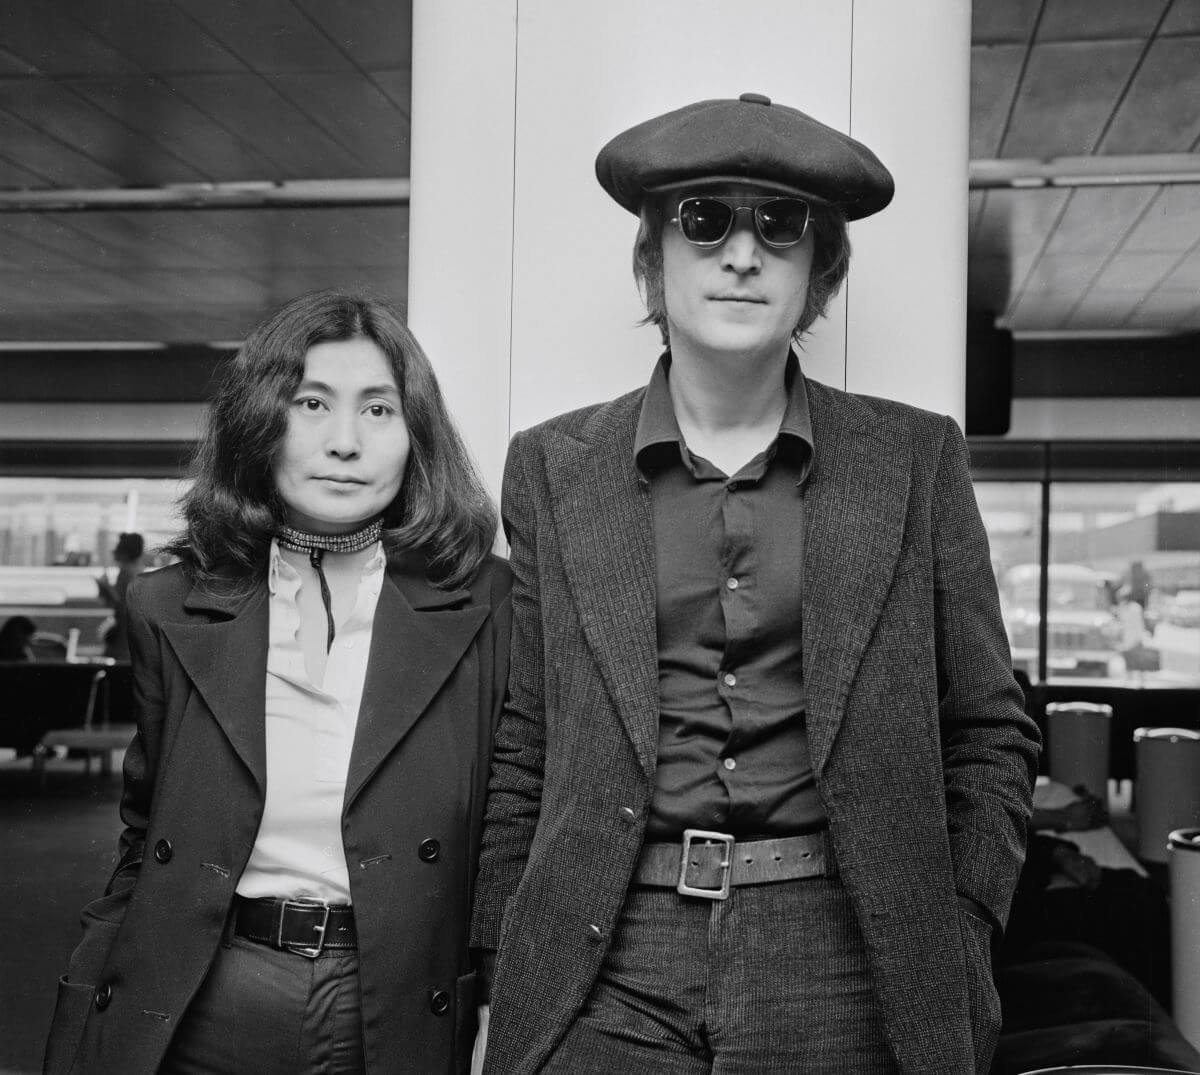 A black and white picture of Yoko Ono and John Lennon standing next to each other. Lennon wears a hat and sunglasses.